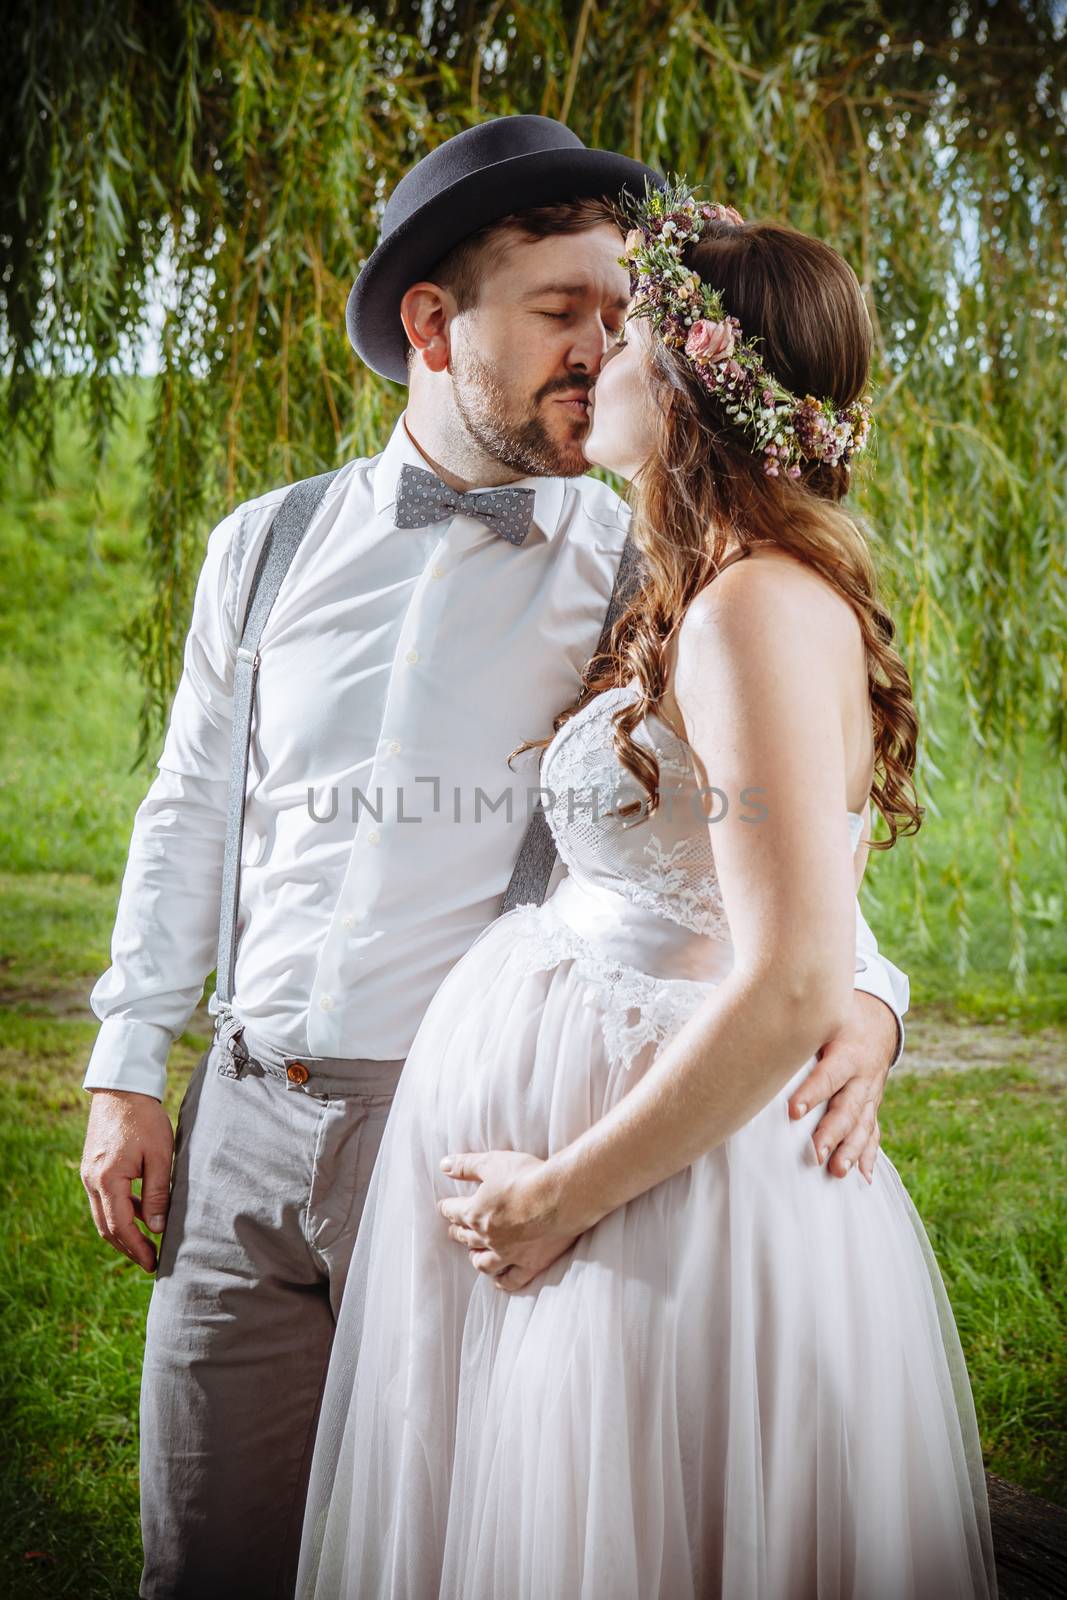 Photo of a pregnant bride and groom kissing during the wedding ceremony.
